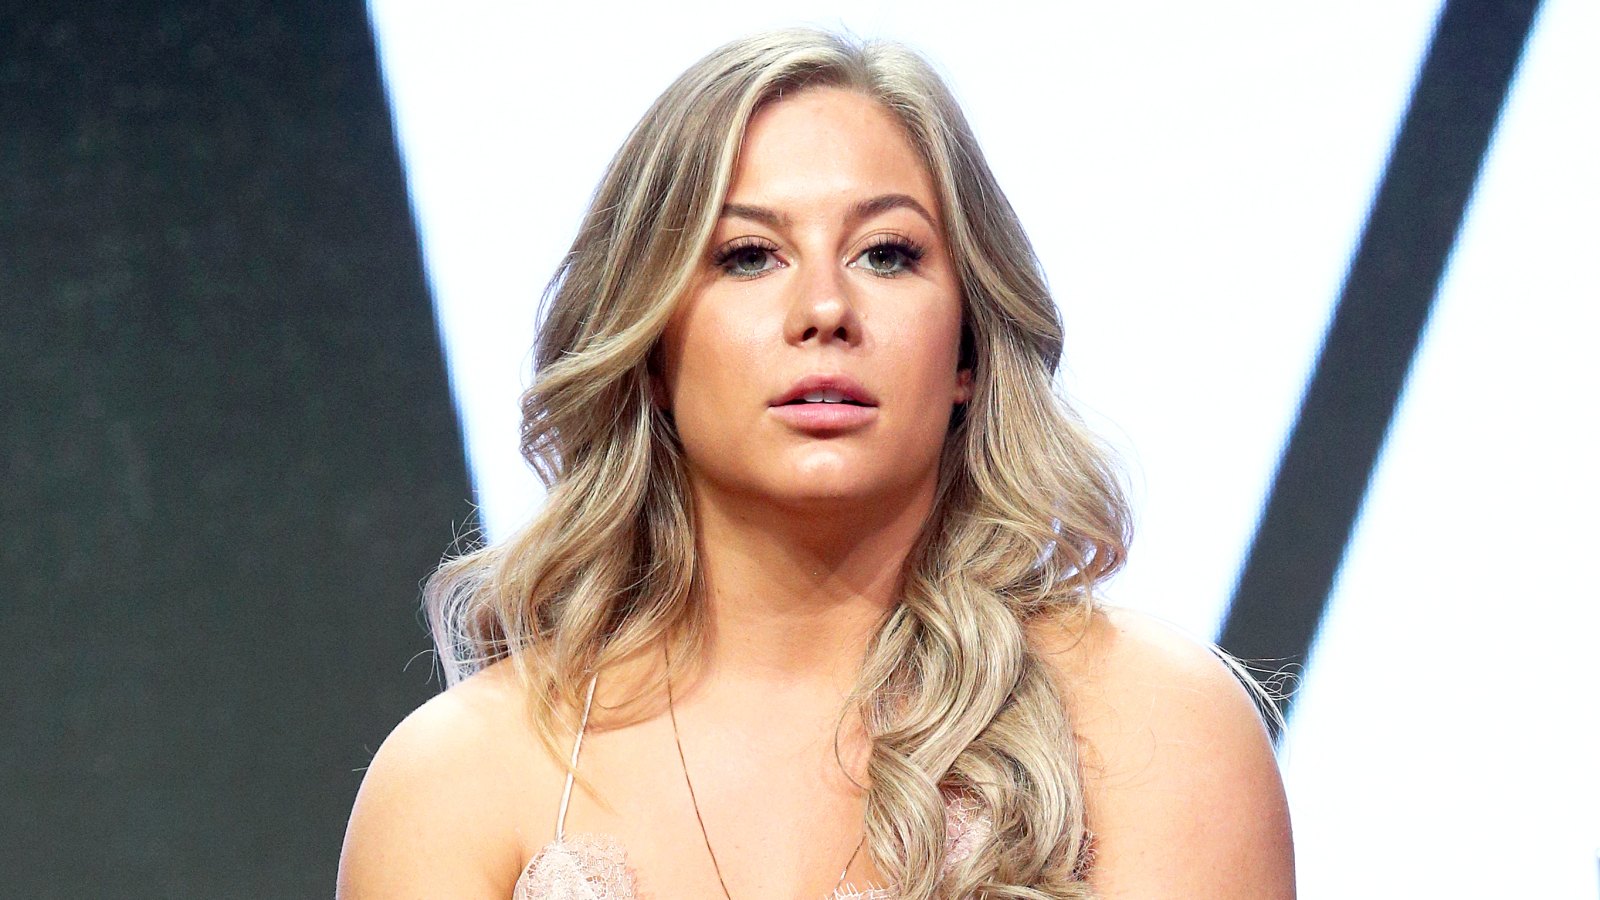 Shawn Johnson during the 2017 Summer Television Critics Association Press Tour at The Beverly Hilton Hotel on August 3, 2017 in Beverly Hills, California.